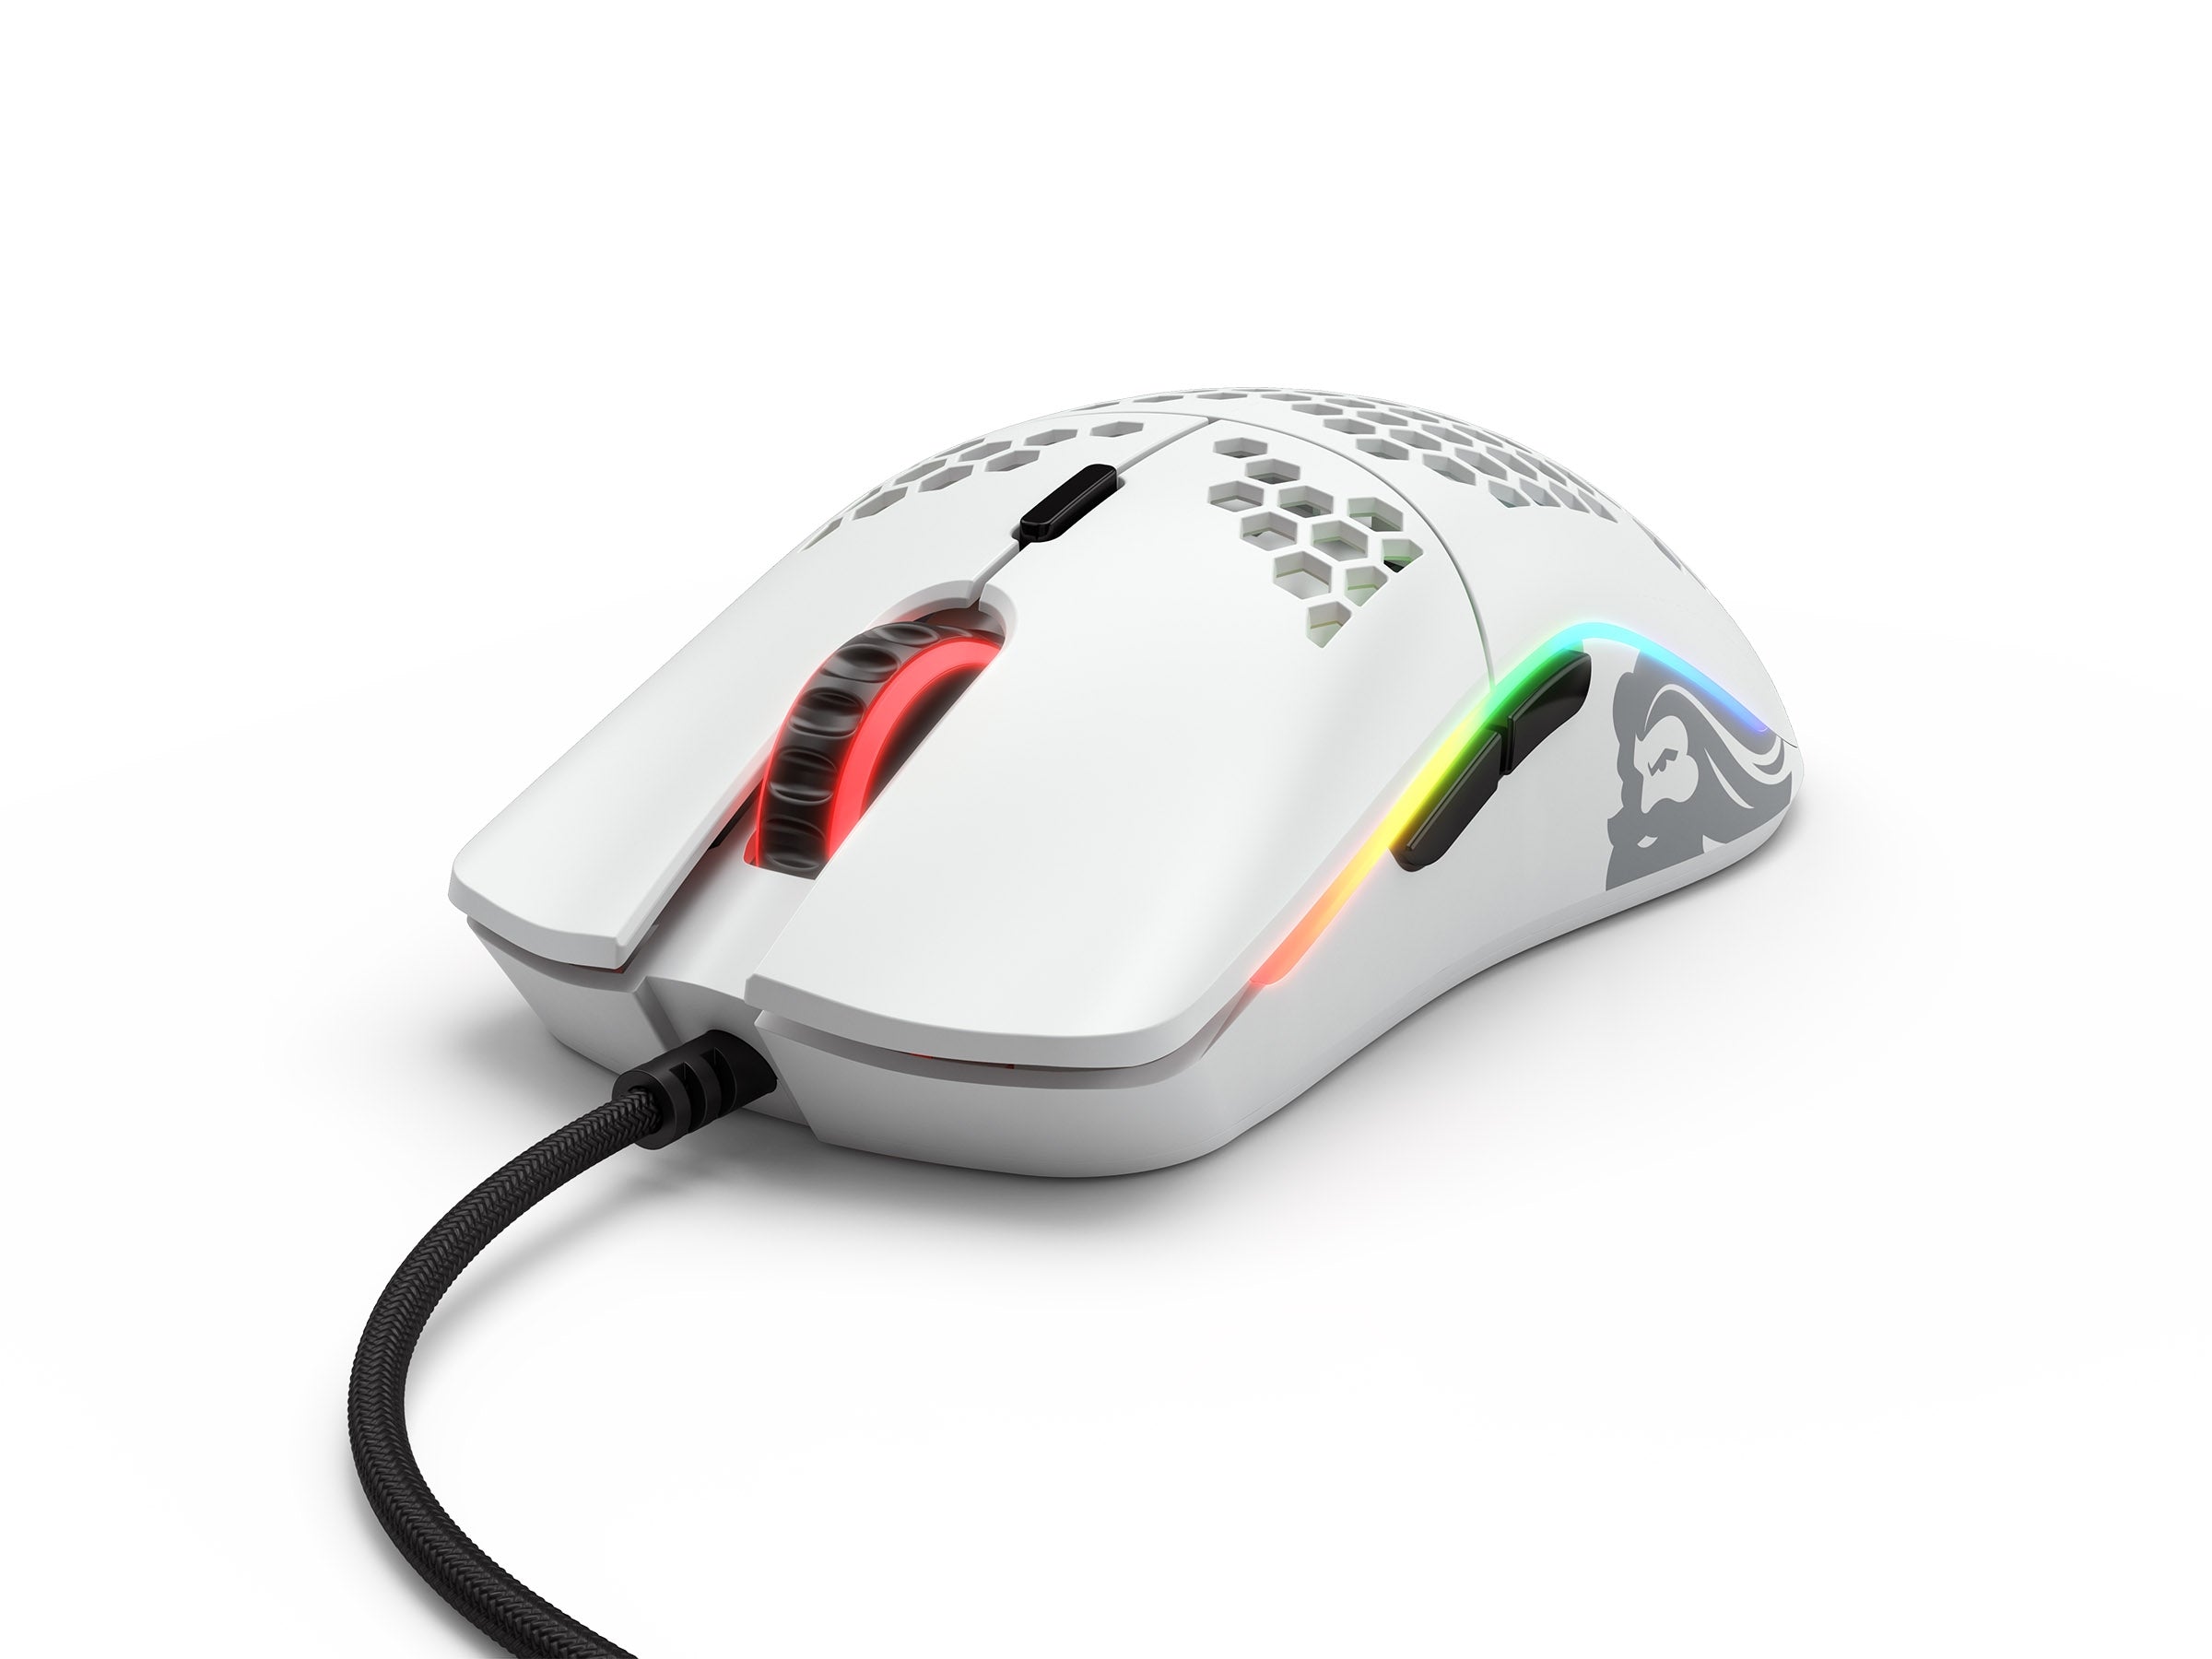 Glorious PC Model O Minus Matte White Lightweight Gaming Mouse MKRL7MAEG5 |27487|